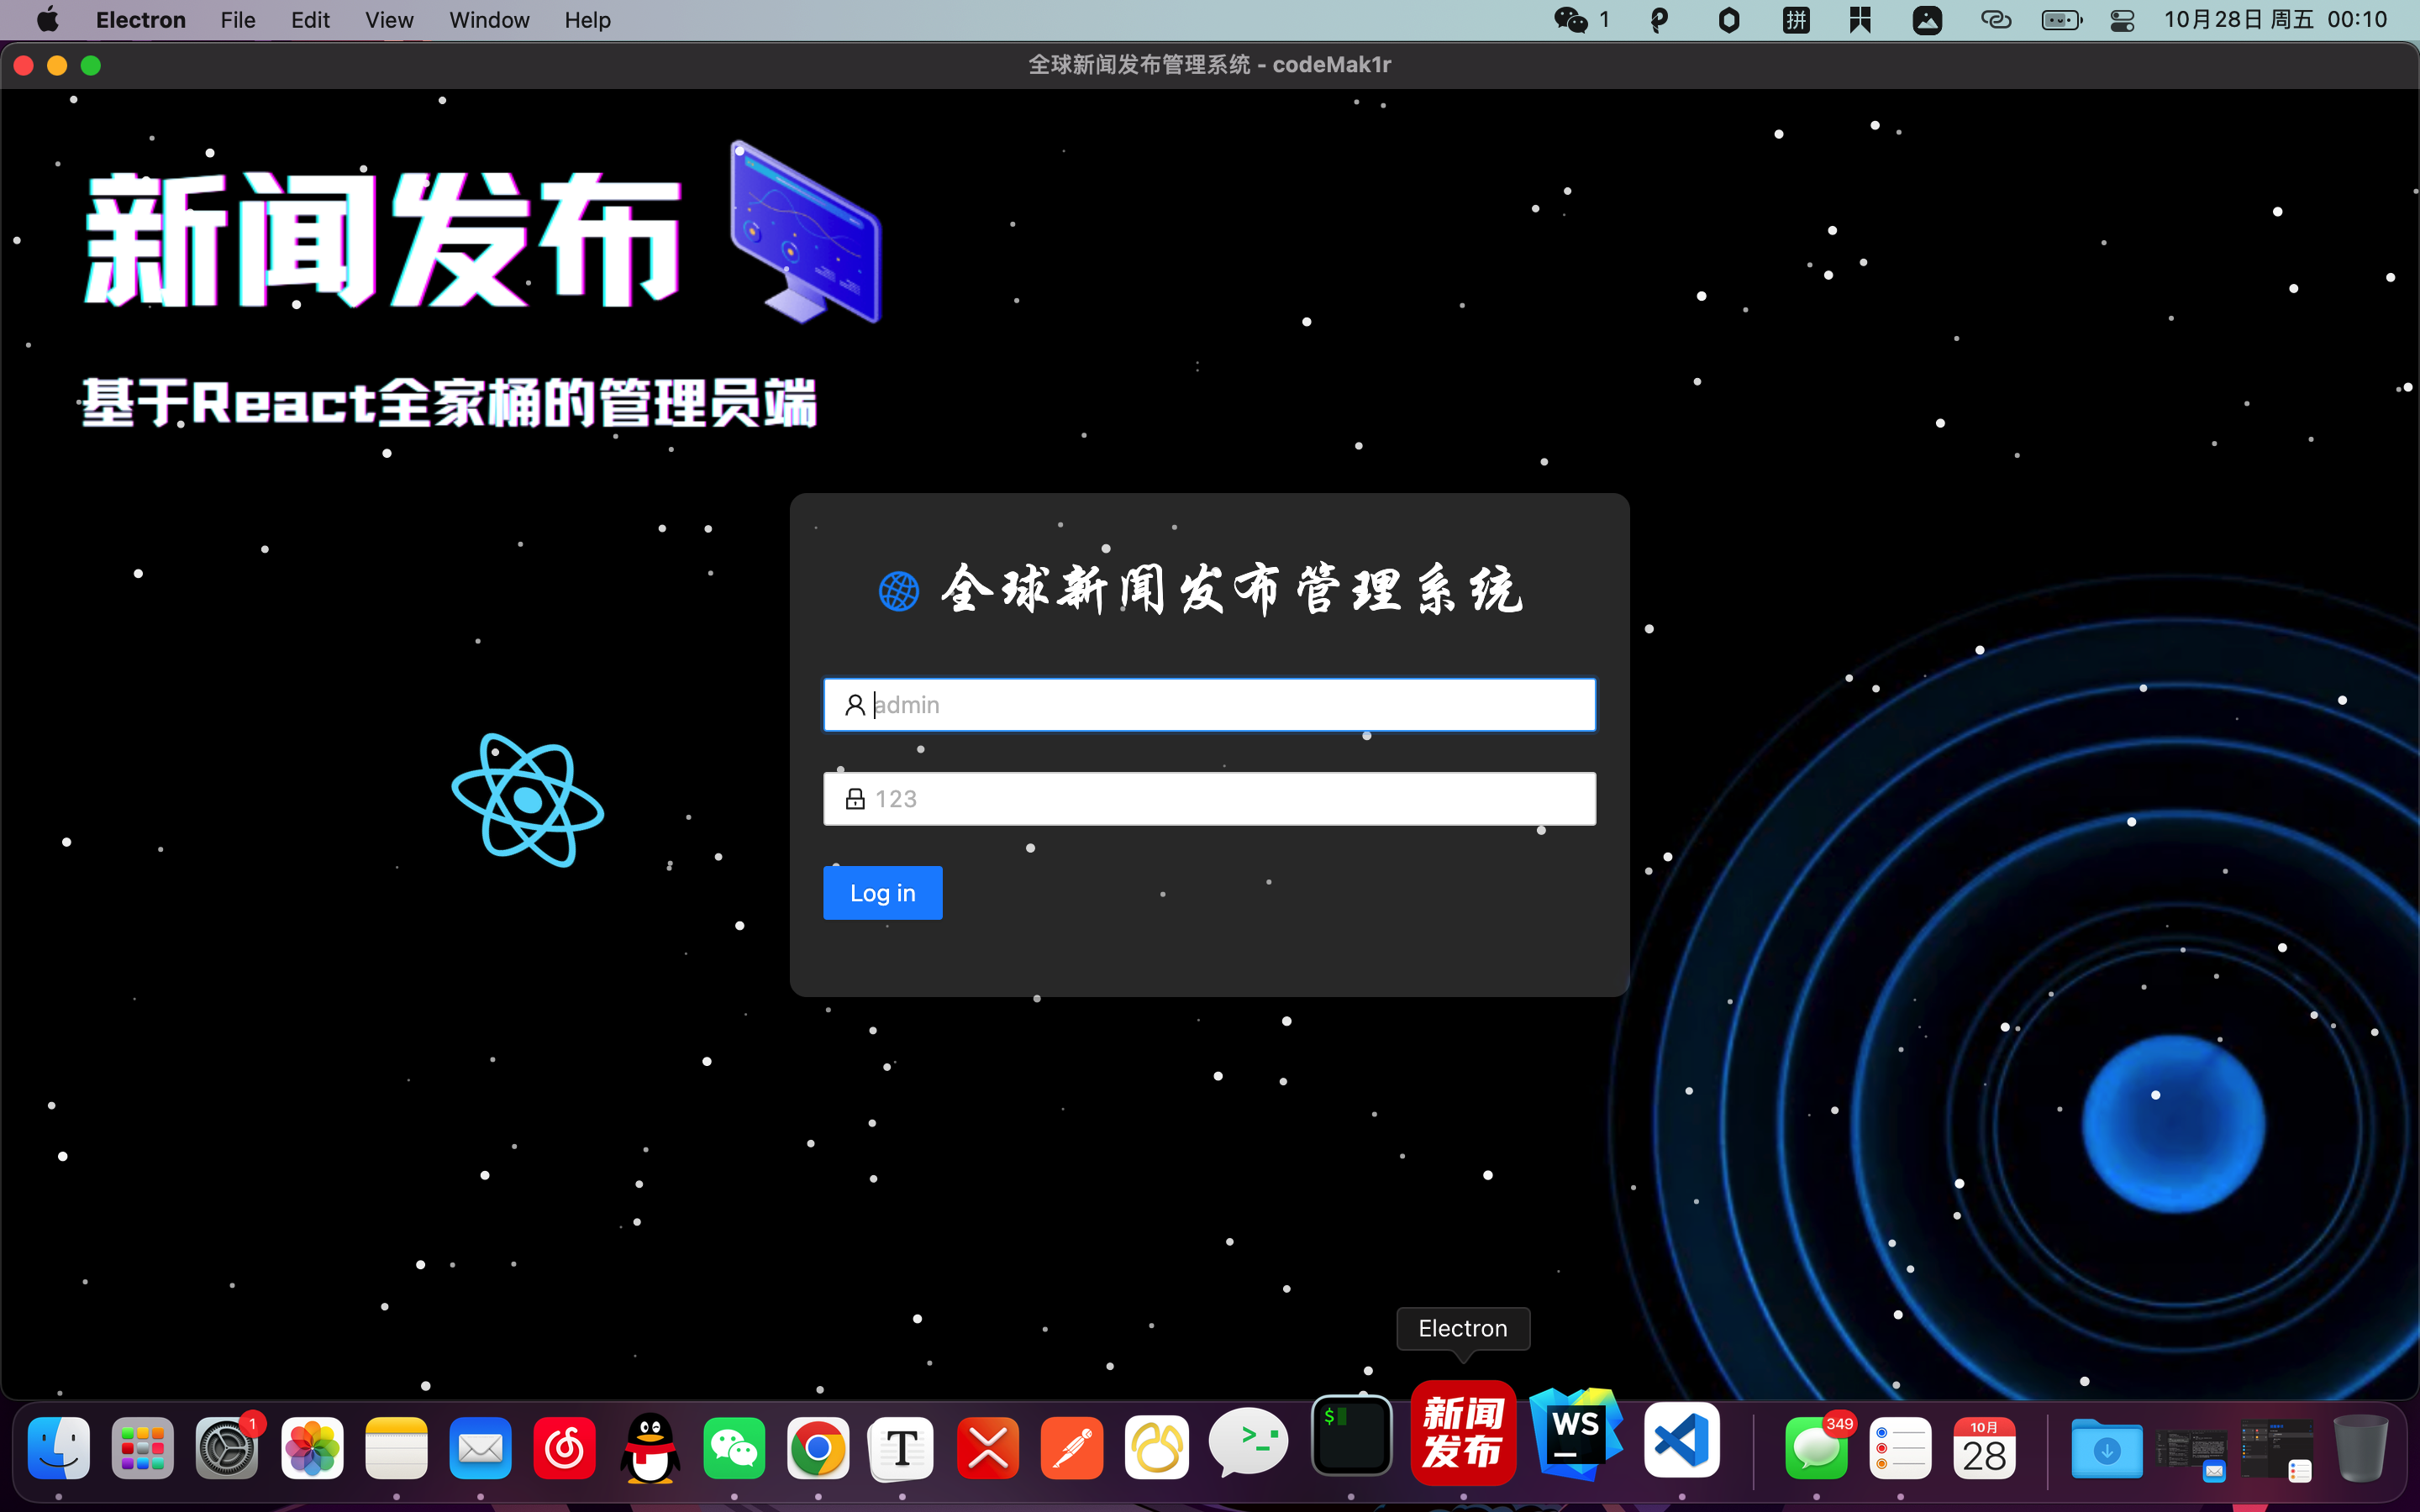 electron for MacOS - login